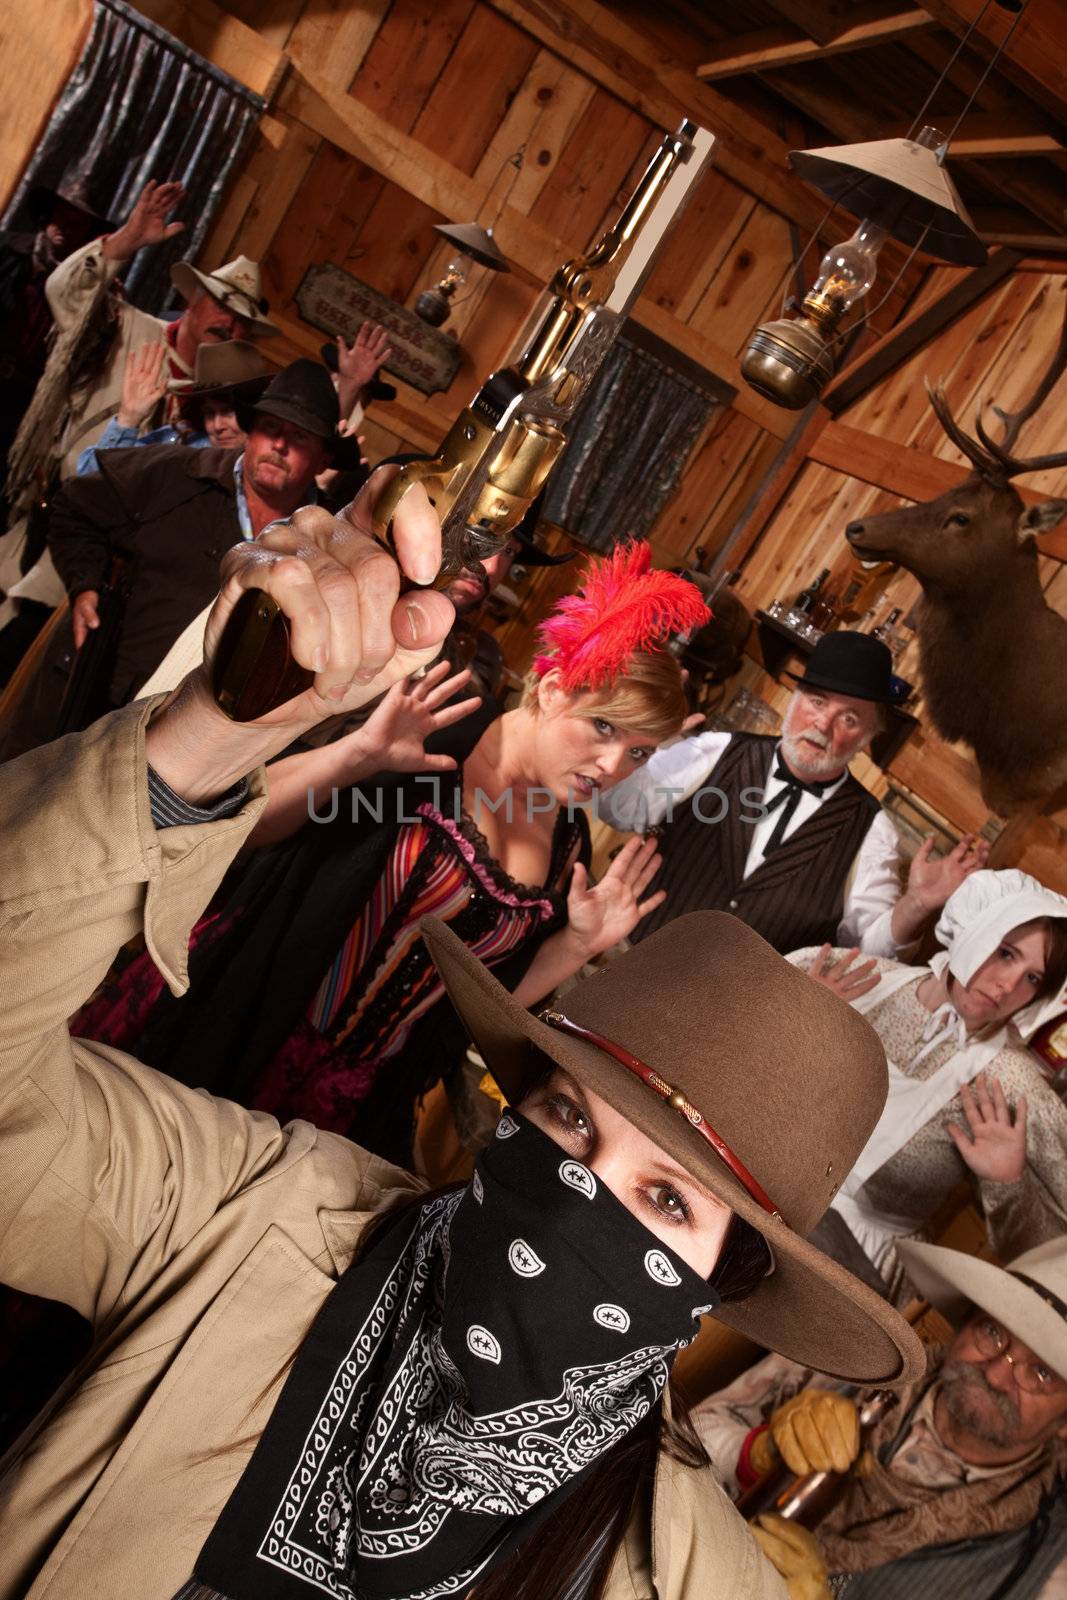 Robber Holds Up Customers in Saloon by Creatista